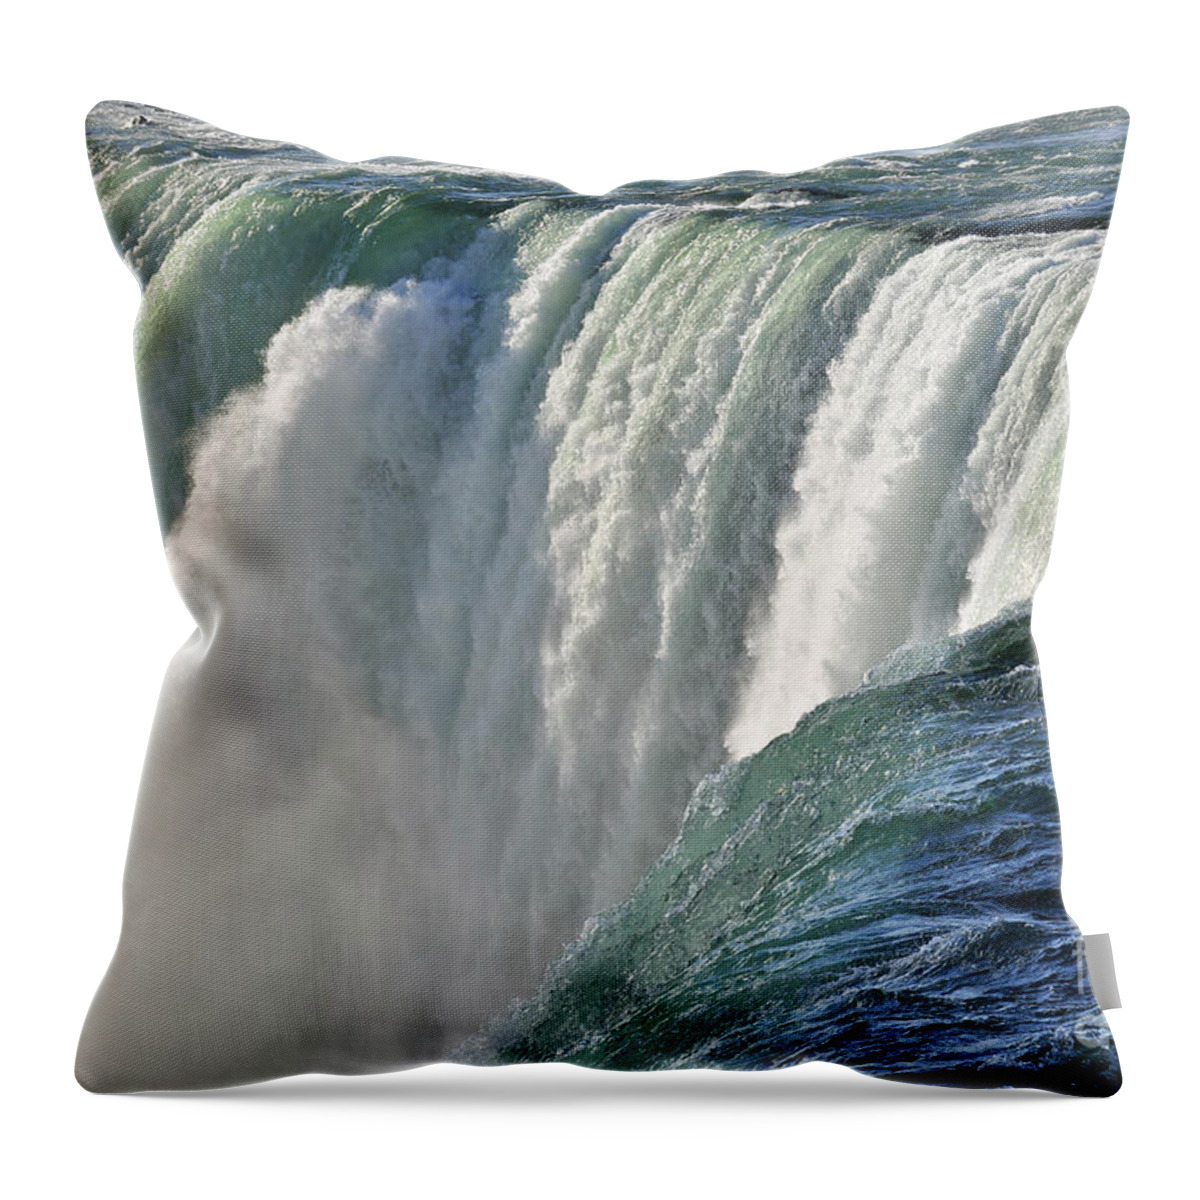 Waterfall Throw Pillow featuring the photograph Horseshoe Falls by Rodney Campbell